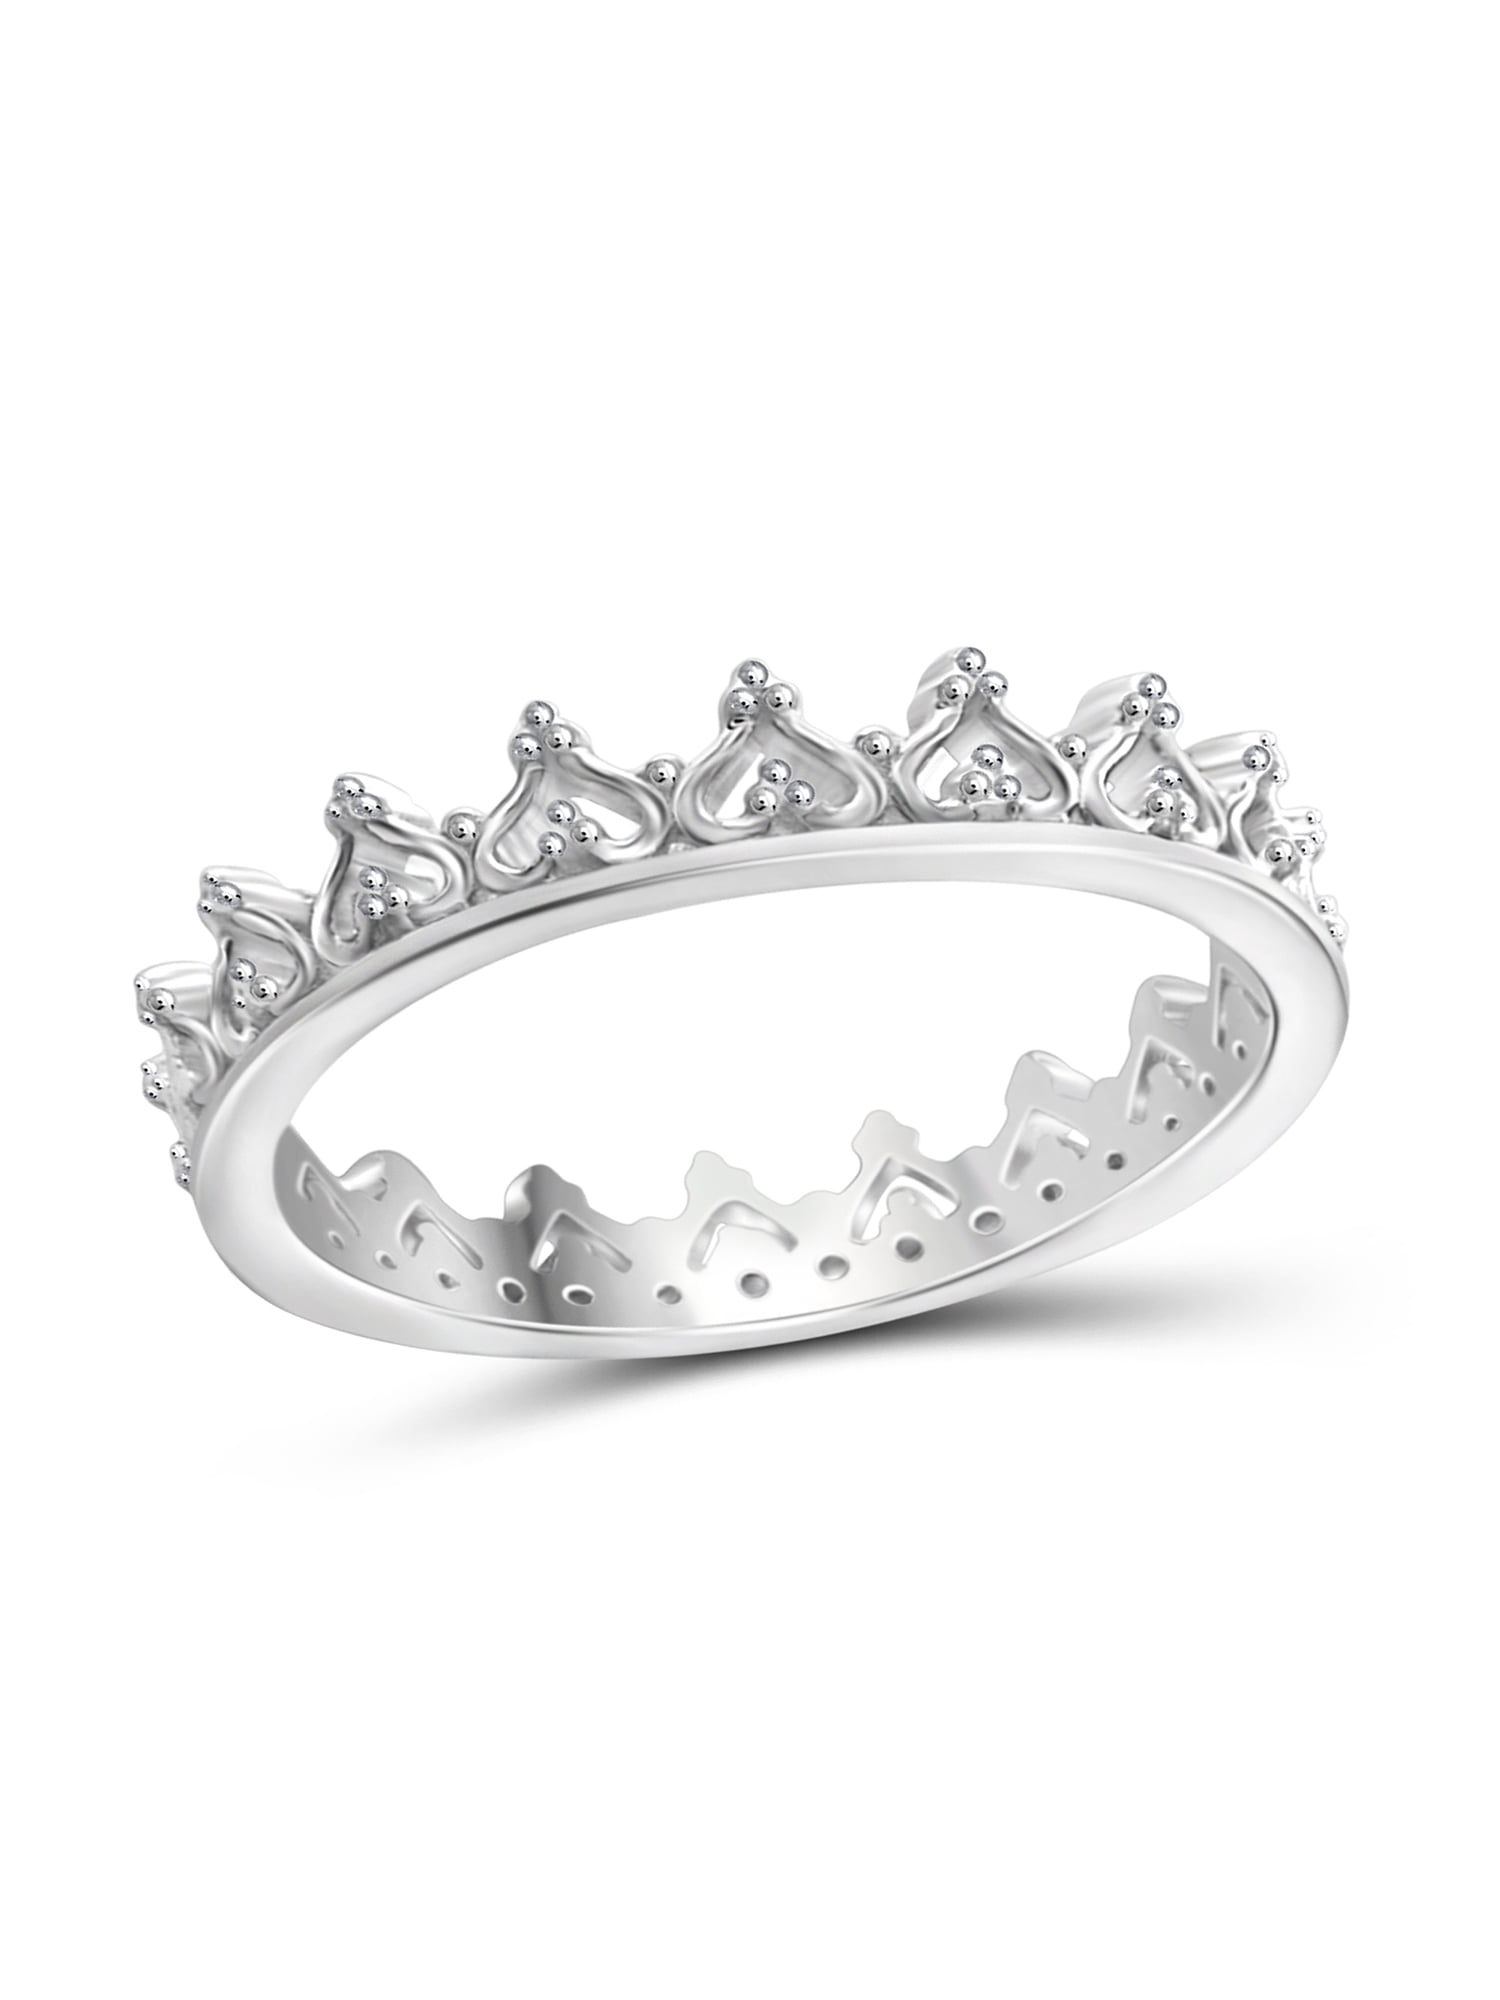 Amazon.com: Tenfit 925 Silver Princess Crown Ring with CZ Inlaid Fashion  Jewelry Engagement Wedding Ring for Women,Size 5 : Clothing, Shoes & Jewelry